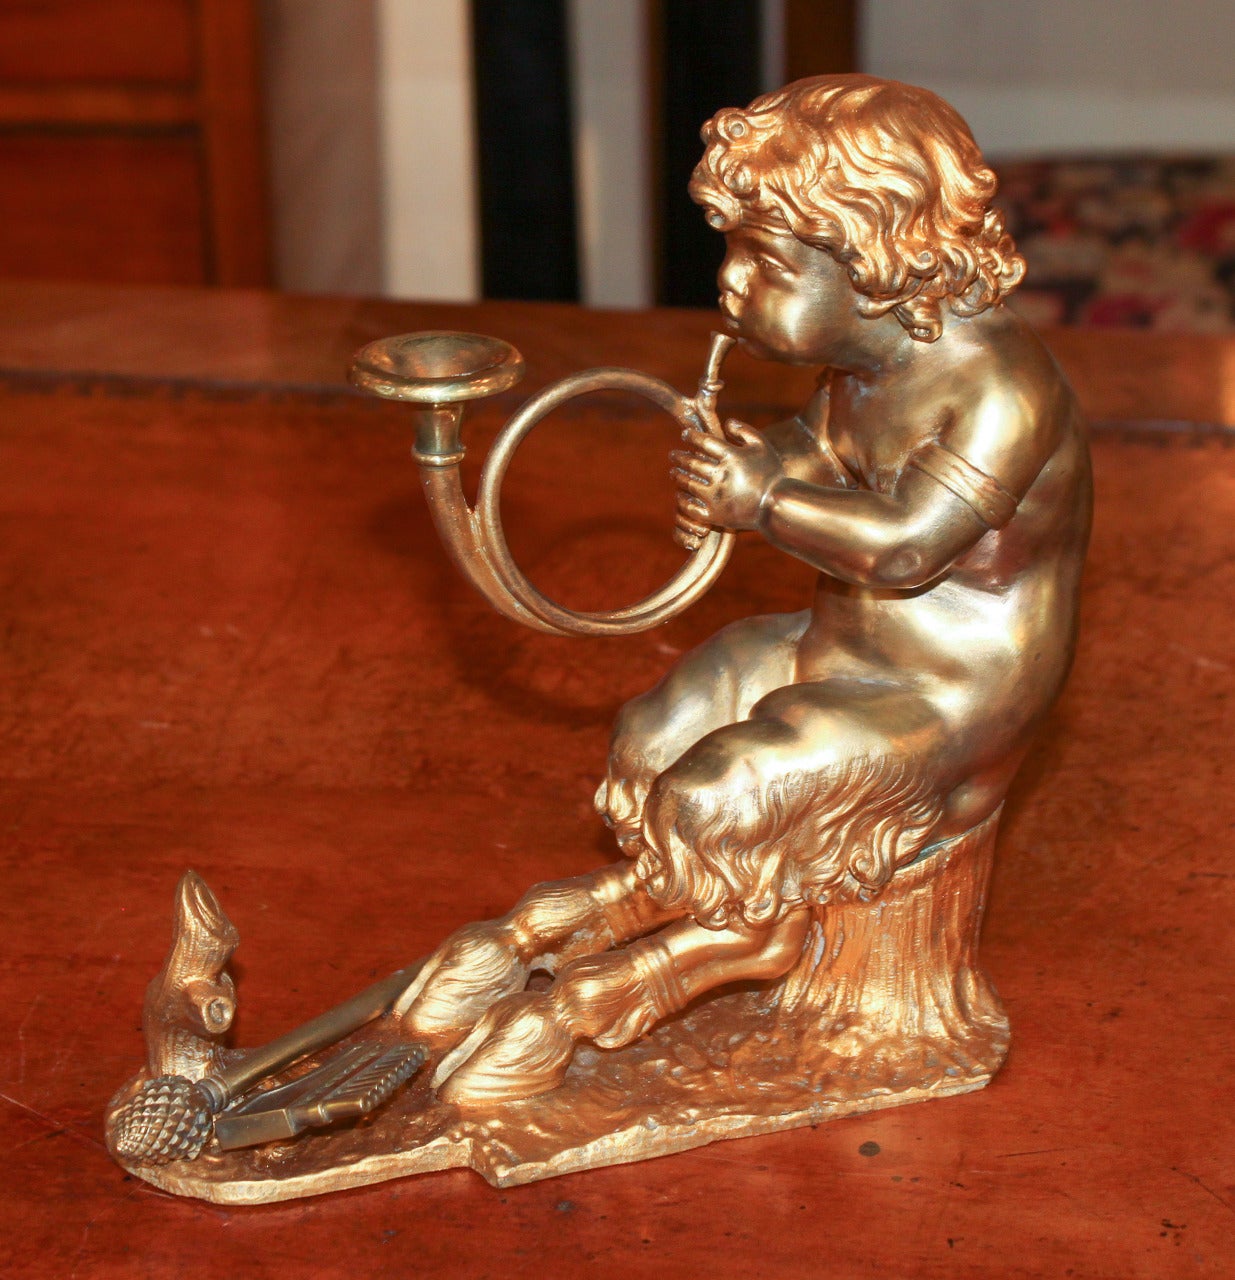 Wonderful pair of French gilt bronze bookends each depicting a seated young centaur playing a horn.  Having nicely detailed casting and lustrous finish.  Absolutely darling and worthy of any design!